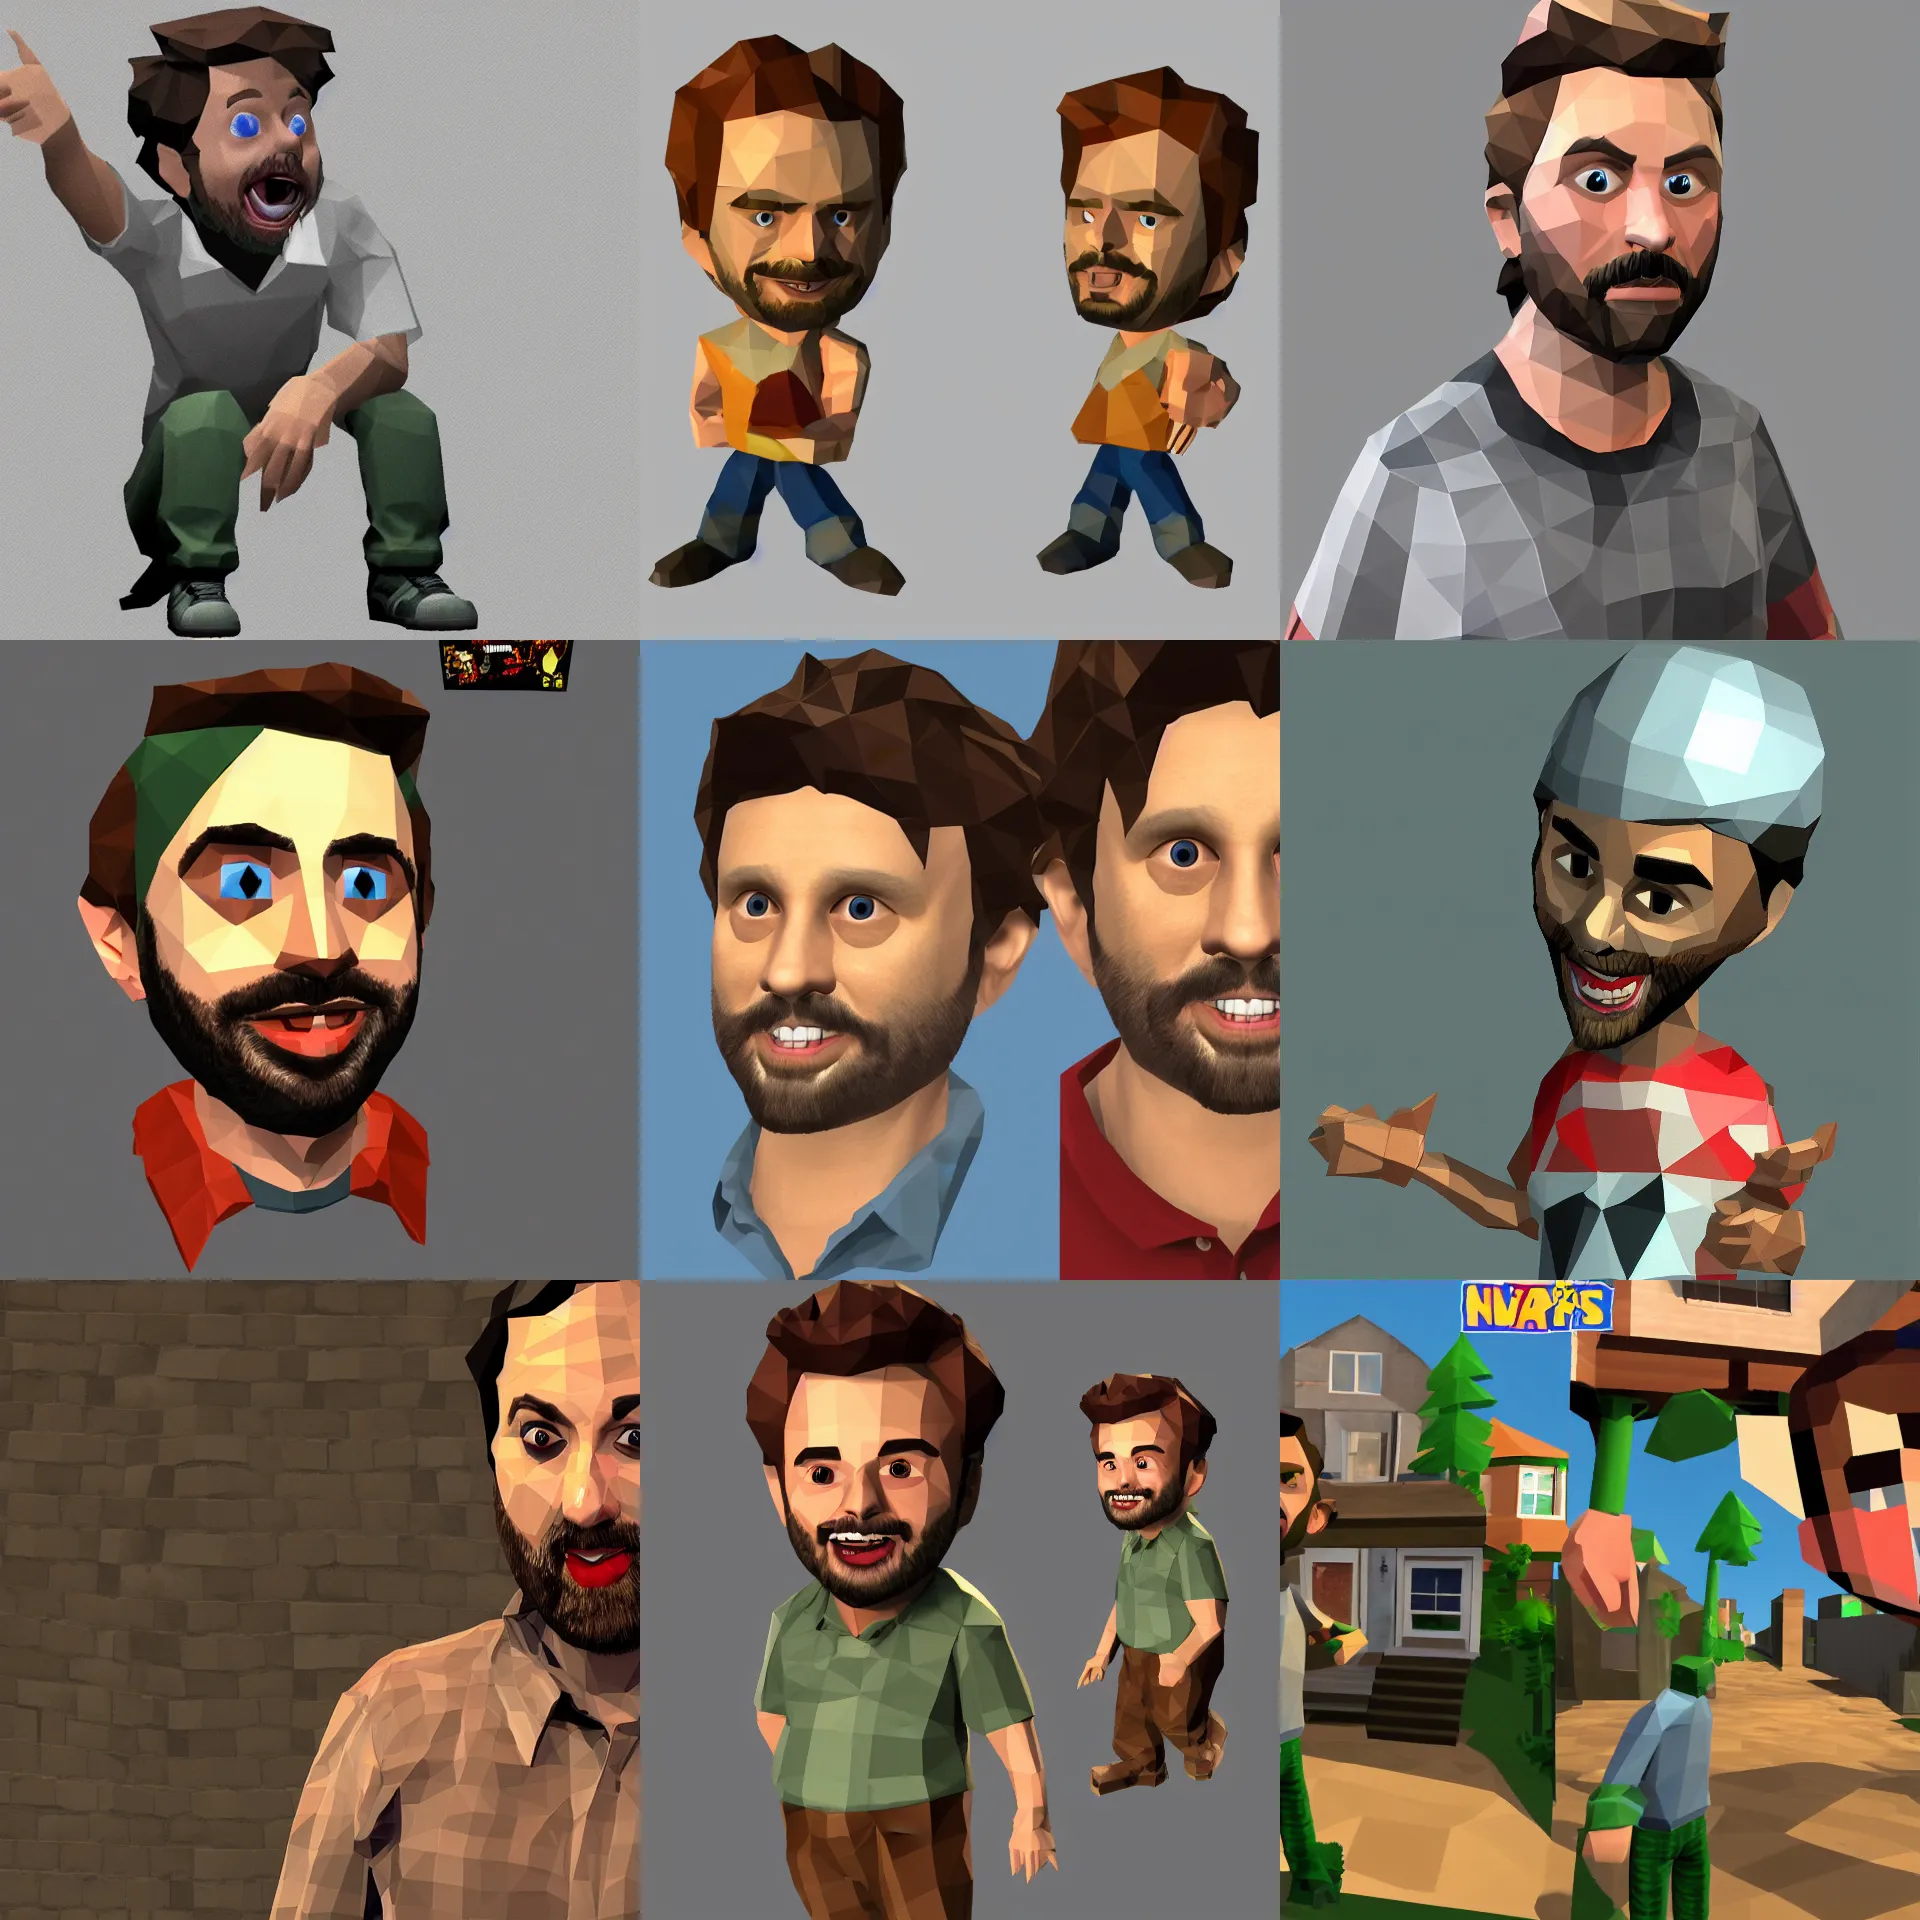 Prompt: charlie kelly from it's always sunny in philadelphia, n 6 4 game, low - poly aliased